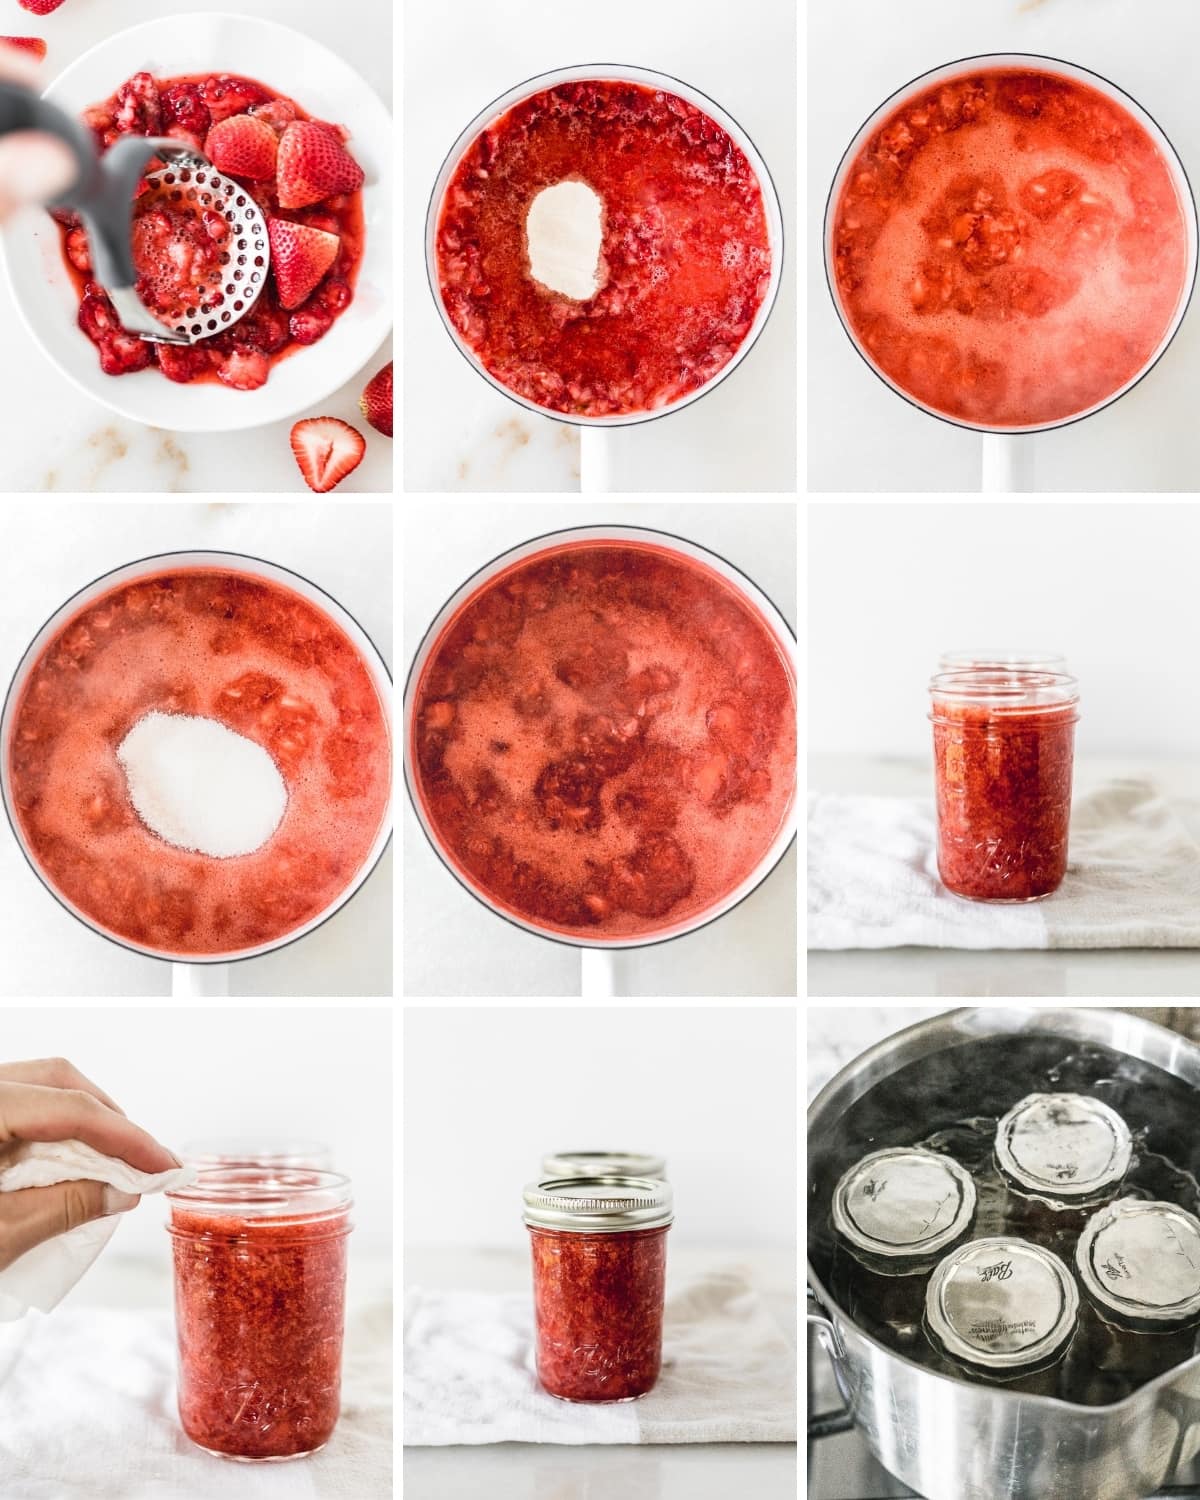 9 image collage showing steps for making and canning low sugar strawberry jam with pectin.